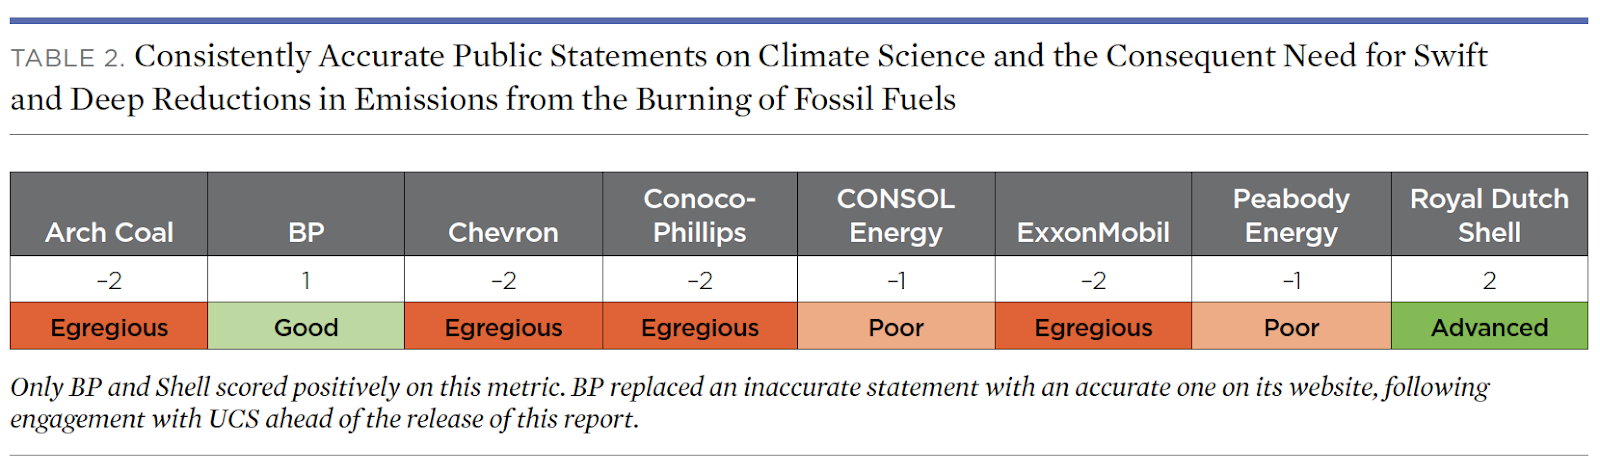 Ratings of fossil fuel companies (mostly poor or egregious)